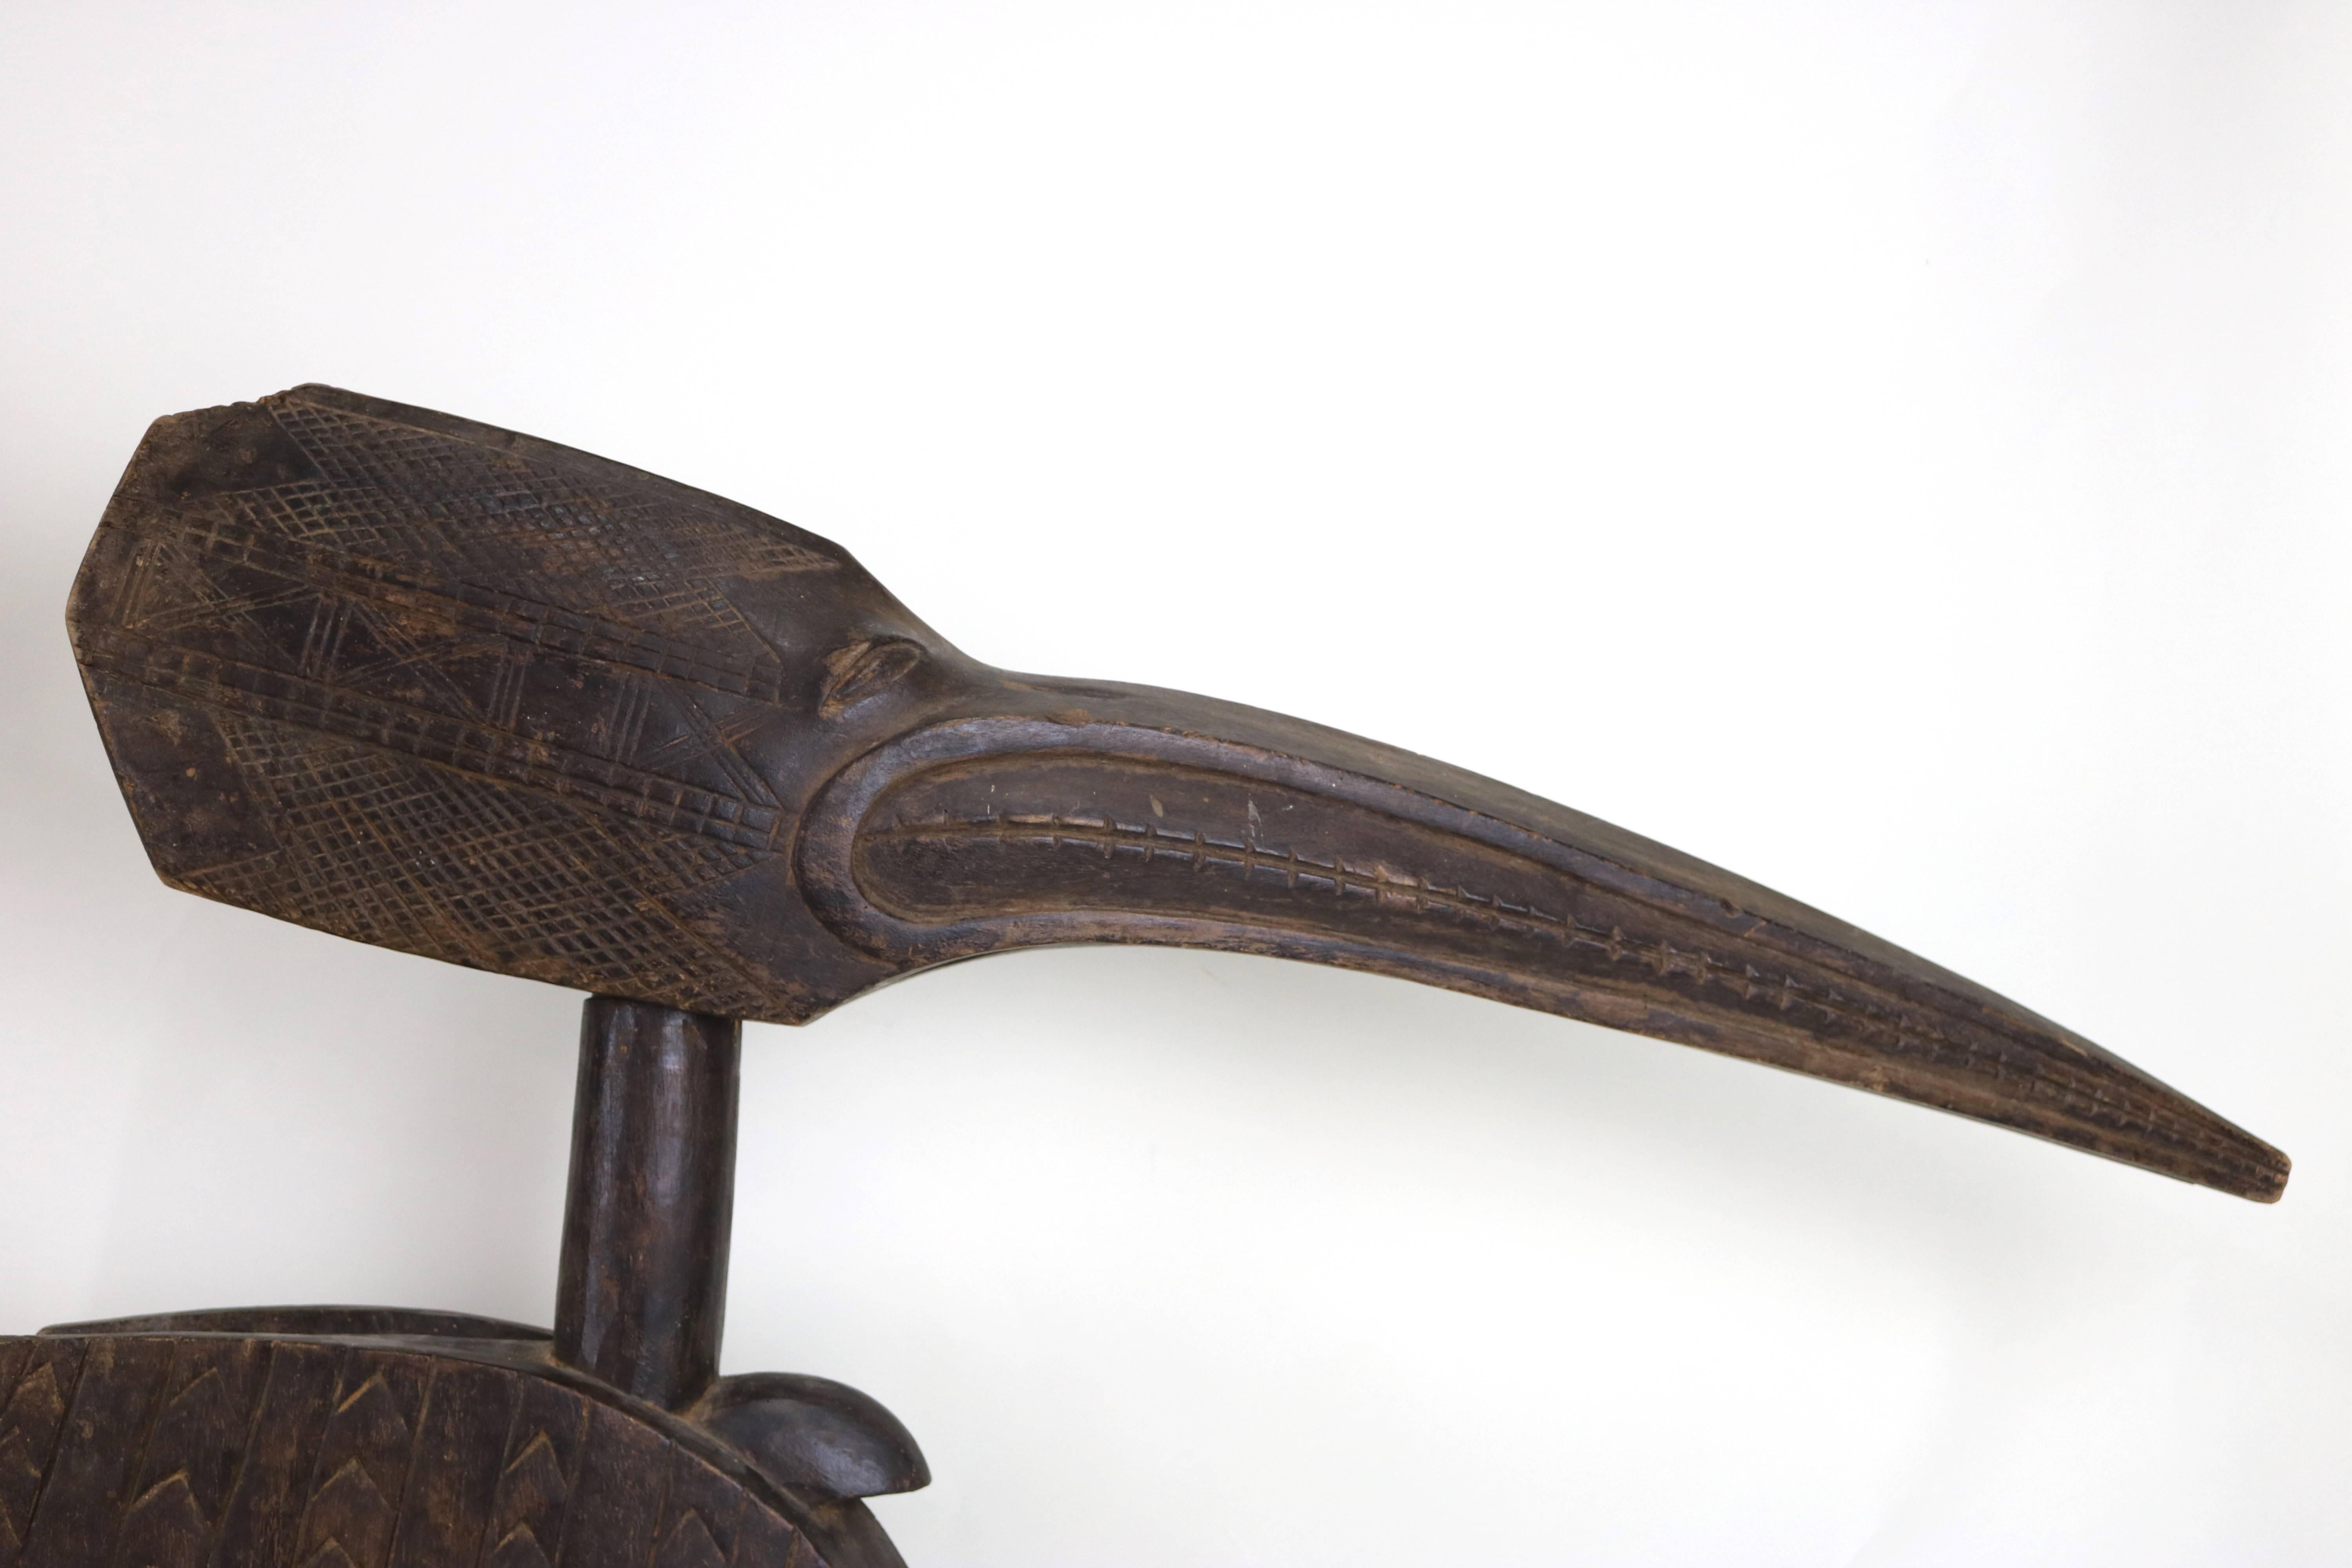 Impressive scale pair of  32 “ high. exotic large African wood baga bird ethnographic carved sculptures. Detailed wood carved designs on the head sitting on the intricately hand carved body, wonderful aged wood patina.
A Spectacular statement piece